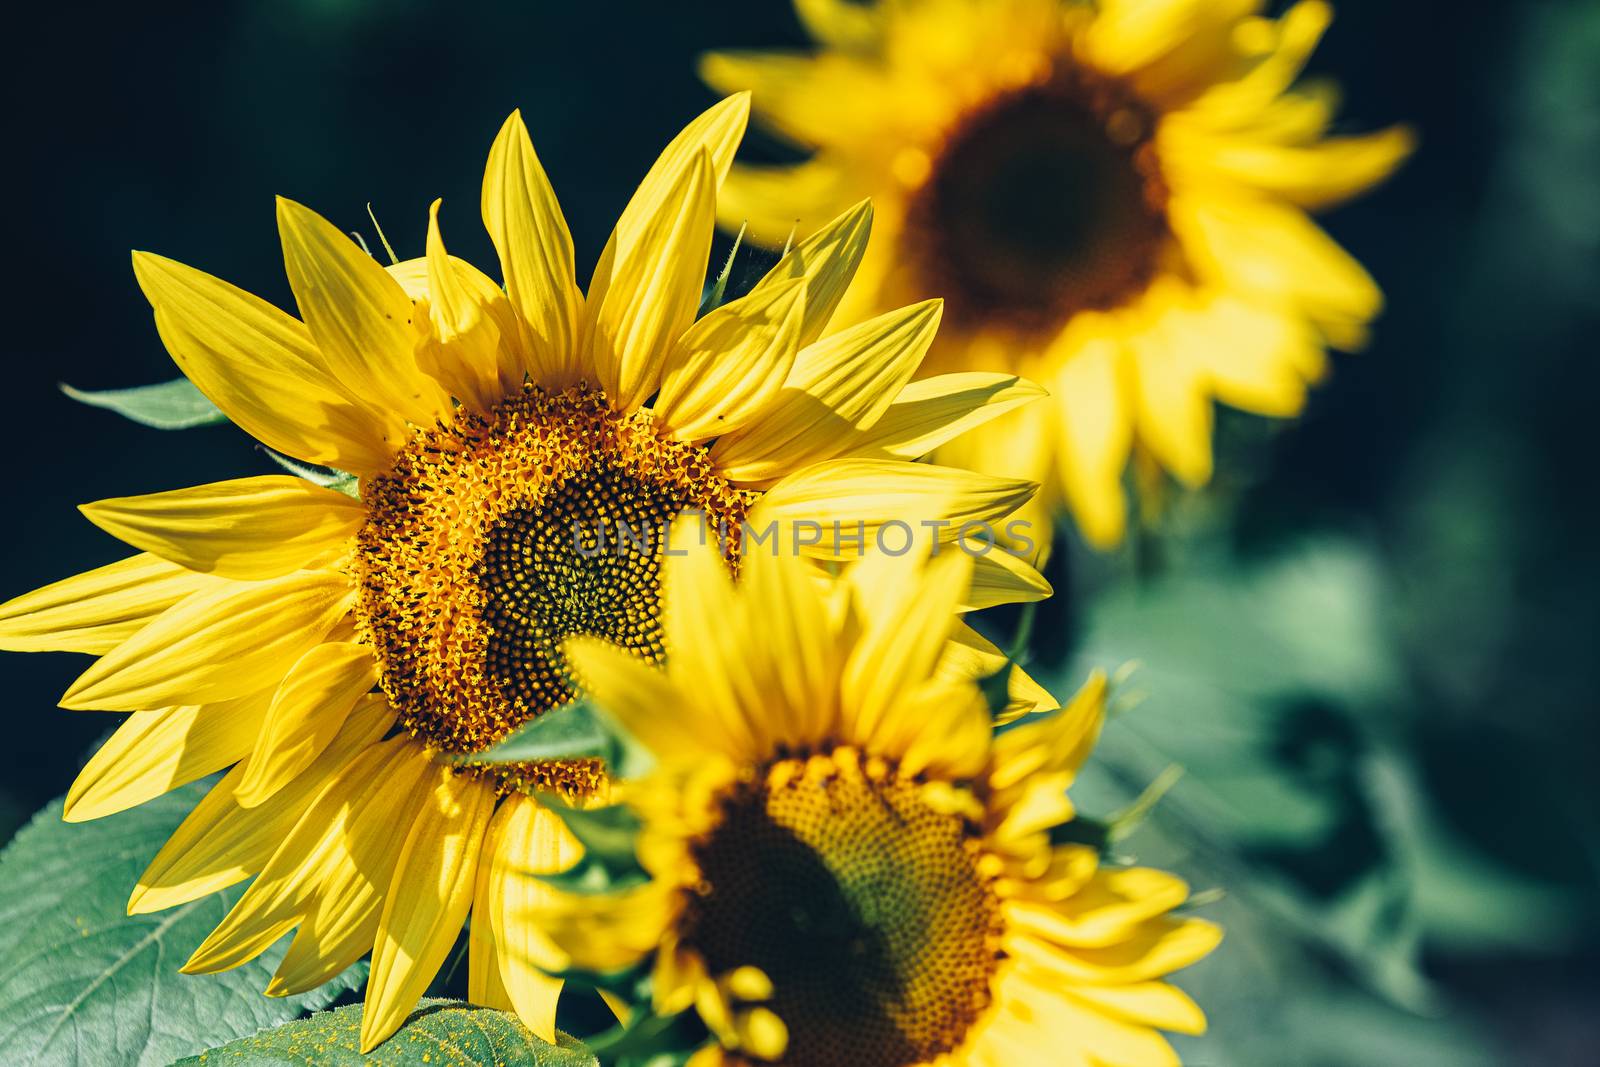 Yellow sunflowers close up. Field of sunflowers, rural landscape by ArtSvitlyna